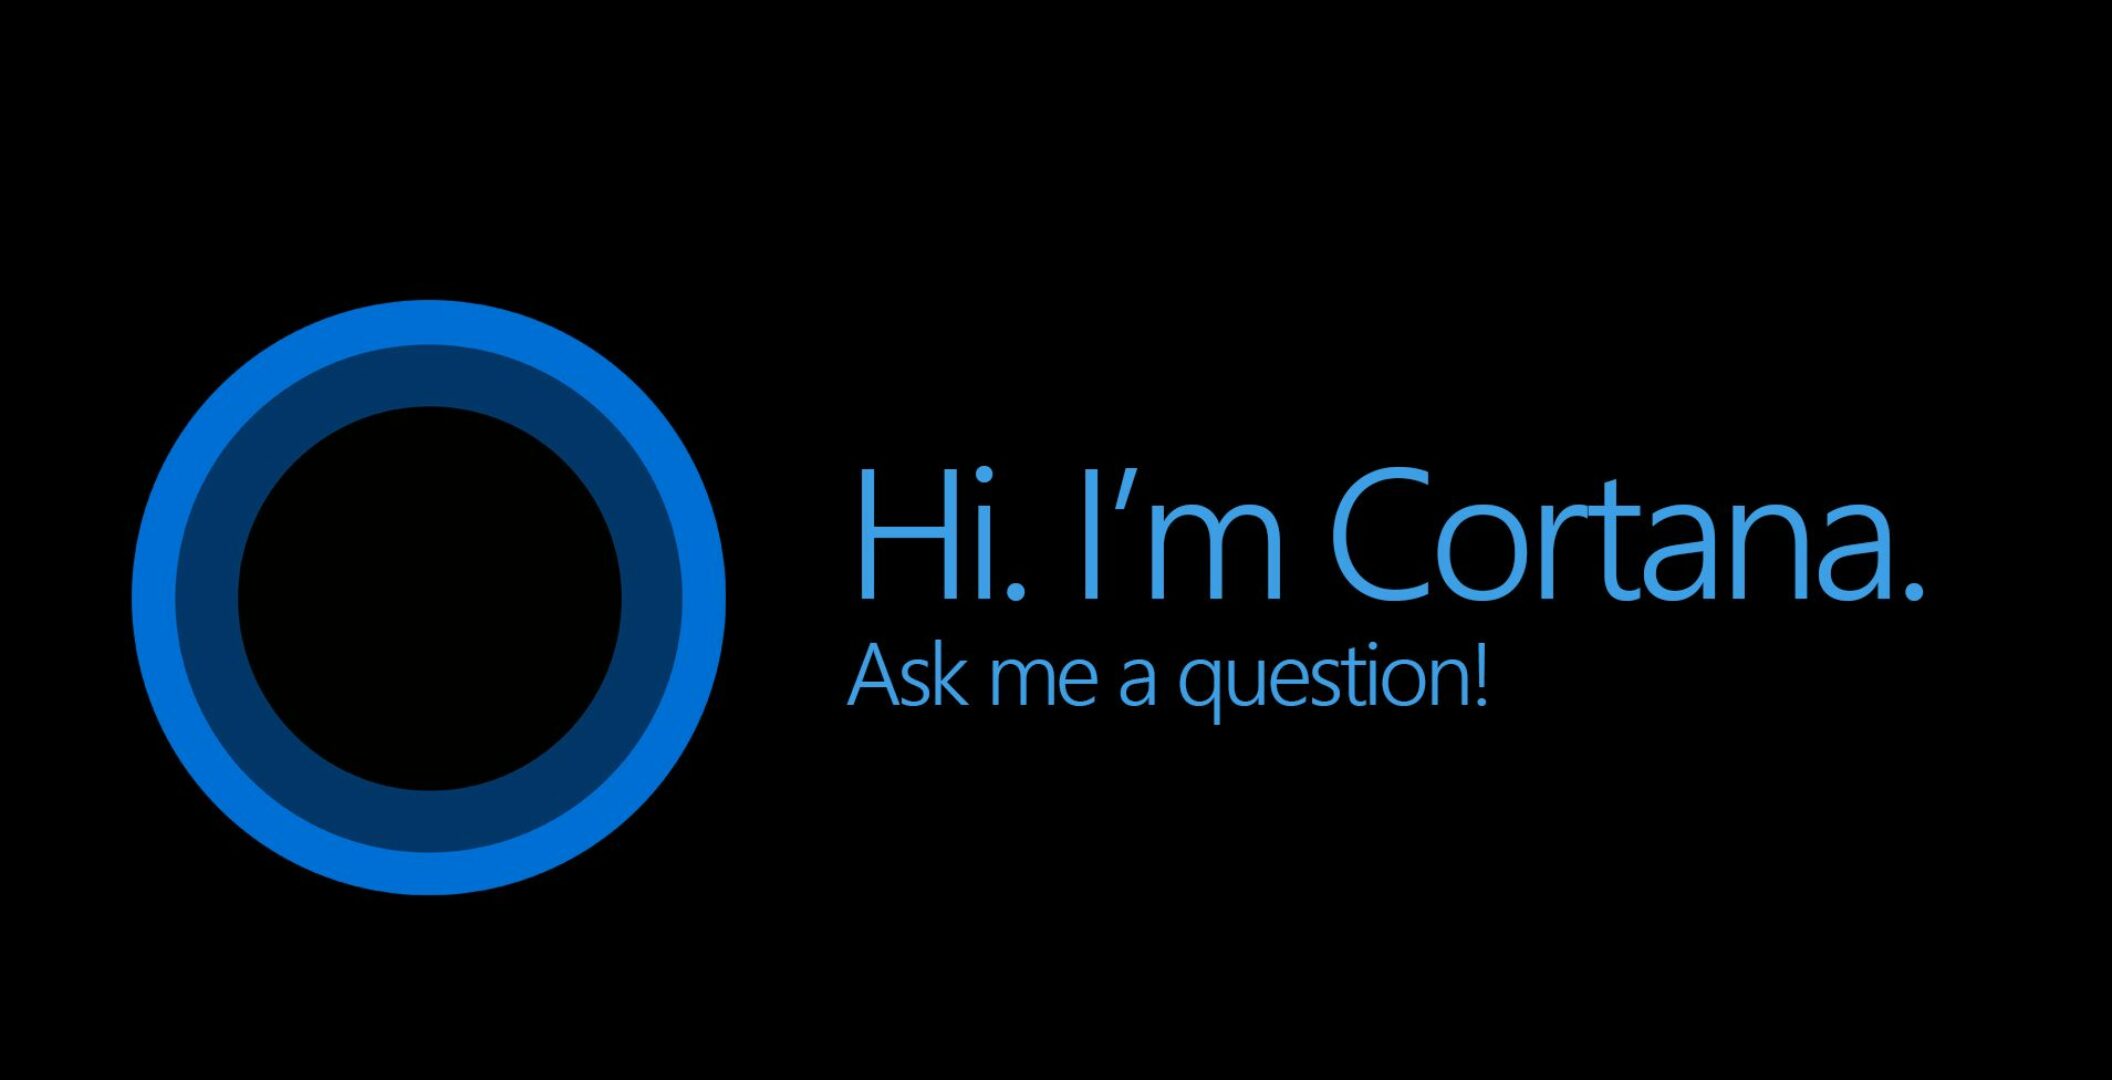 Cortana Android App Leaked